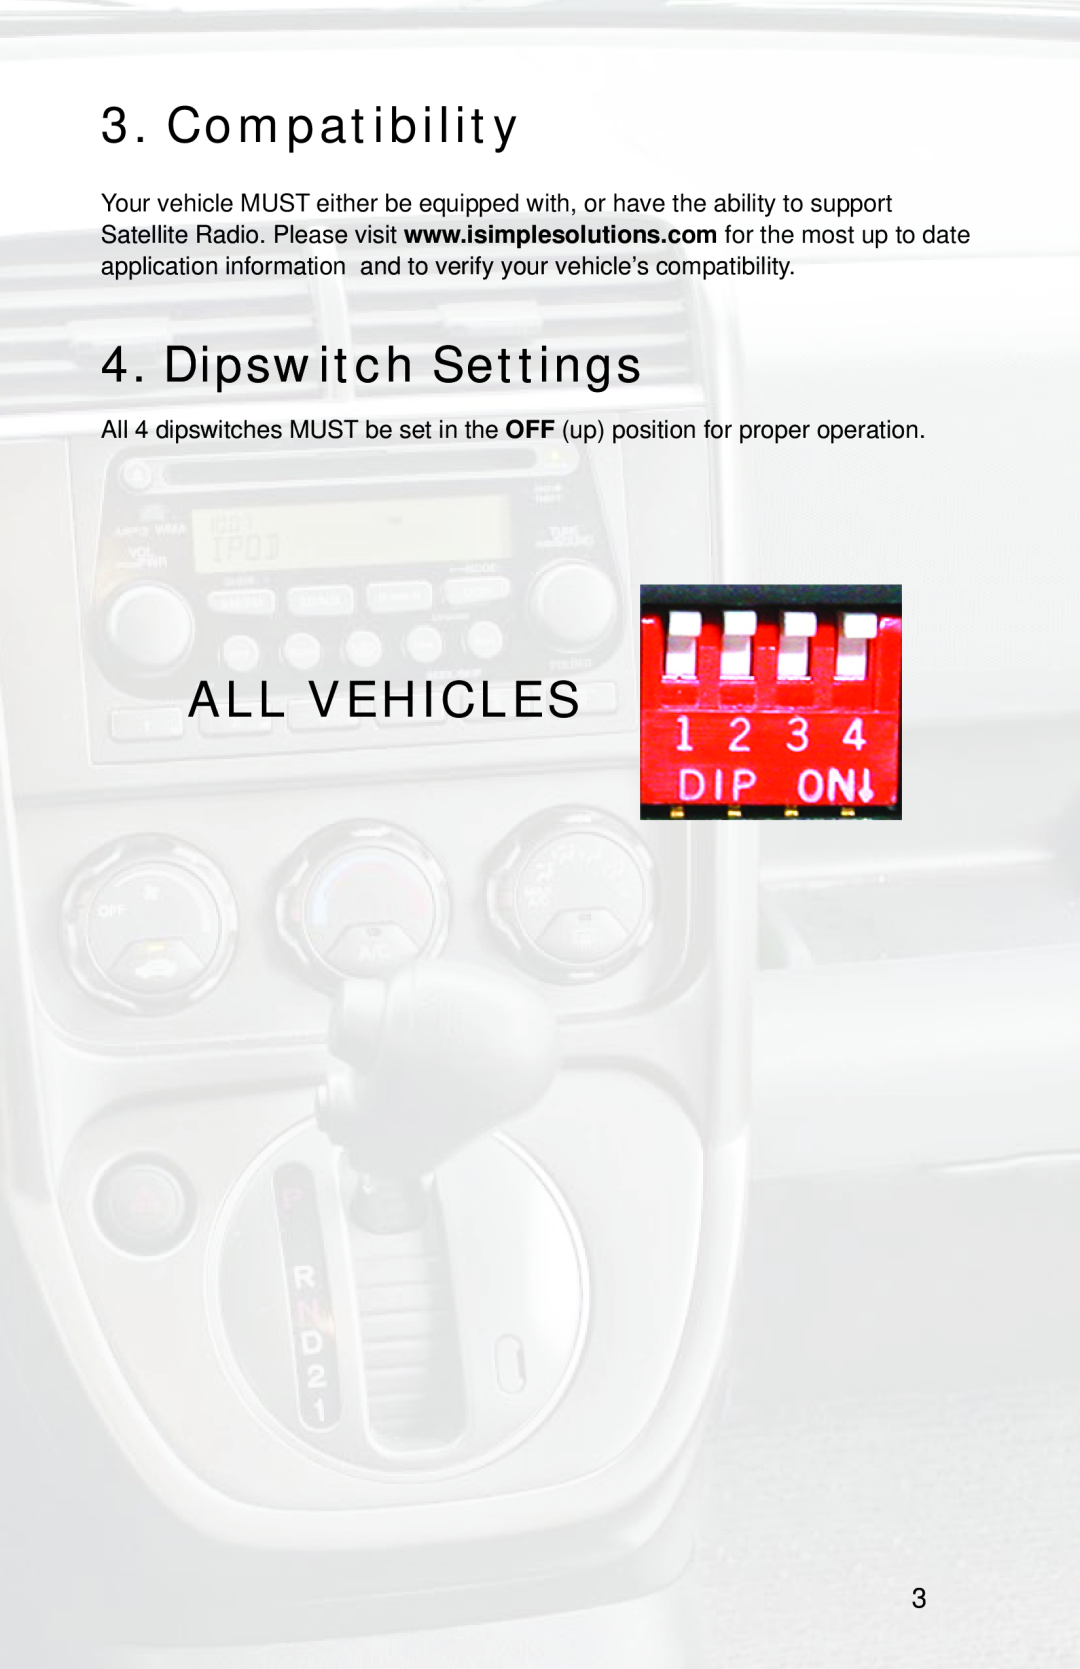 iSimple ISHD11, PGHHD1 owner manual Compatibility, Dipswitch Settings, All Vehicles 